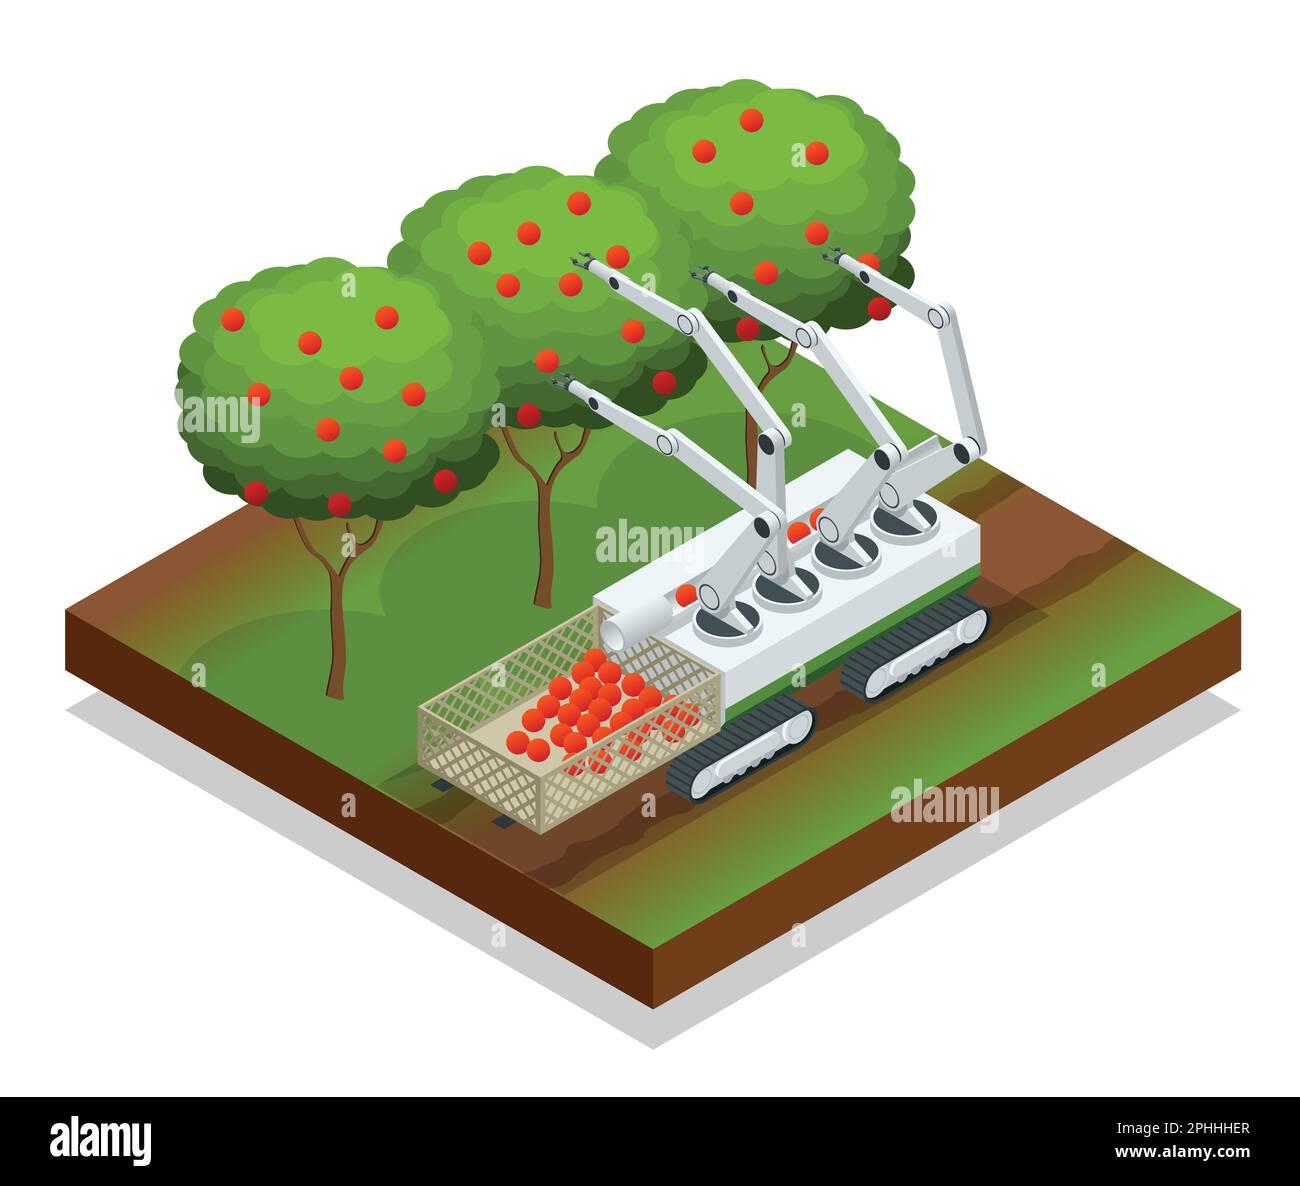 Isometric automatic guided robots harvest fruit from trees. Agricultural machinery robots mechanical arm working technology. Stock Vector